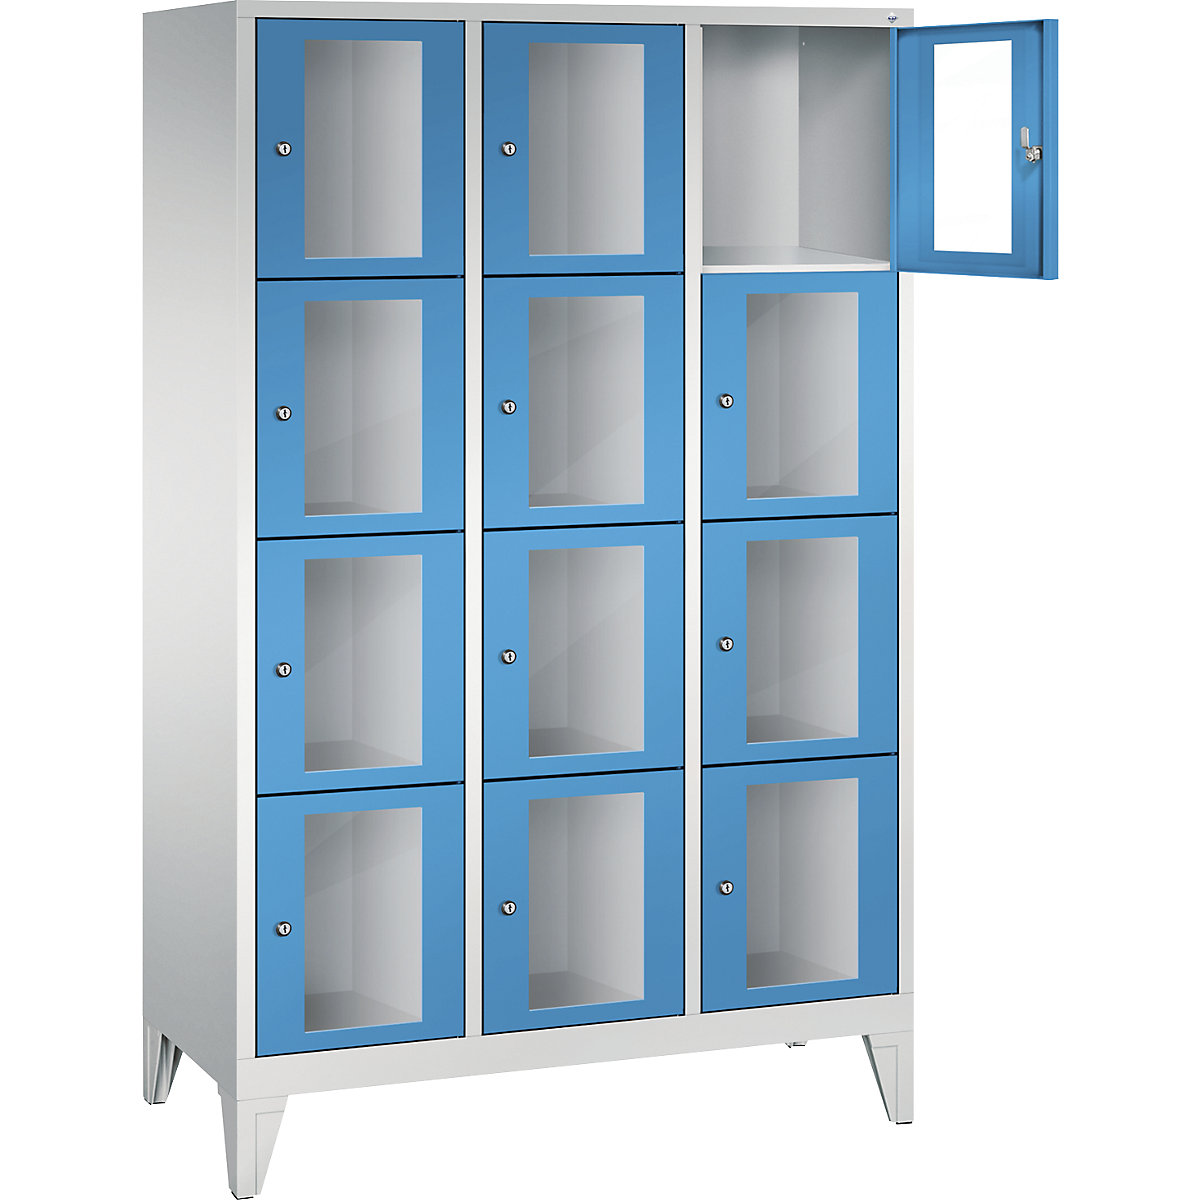 C+P – CLASSIC locker unit, compartment height 375 mm, with feet, 12 compartments, width 1200 mm, light blue door